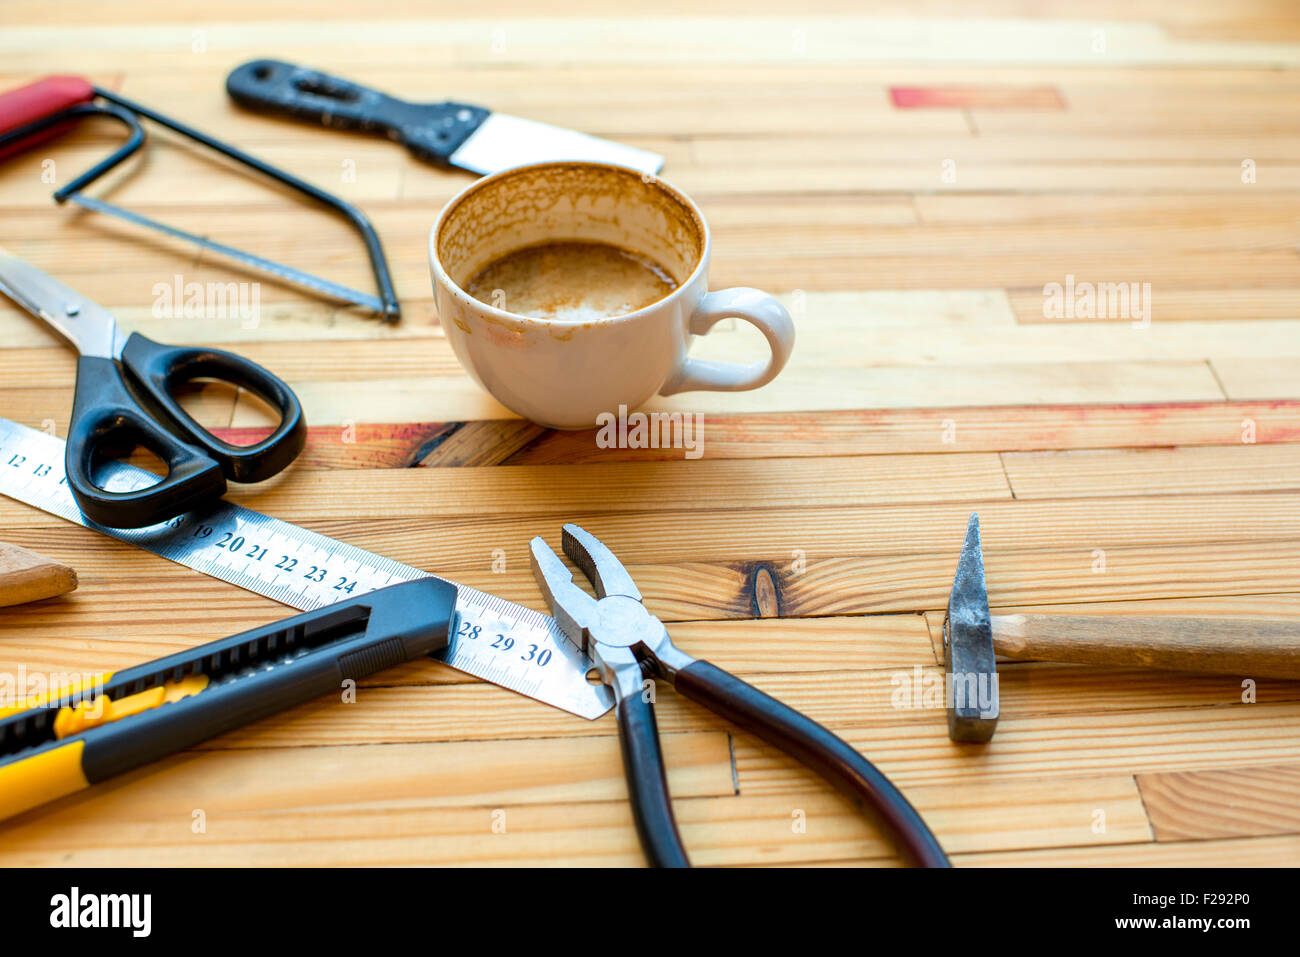 Different reapair instruments with cup of coffee on the woden table Stock Photo